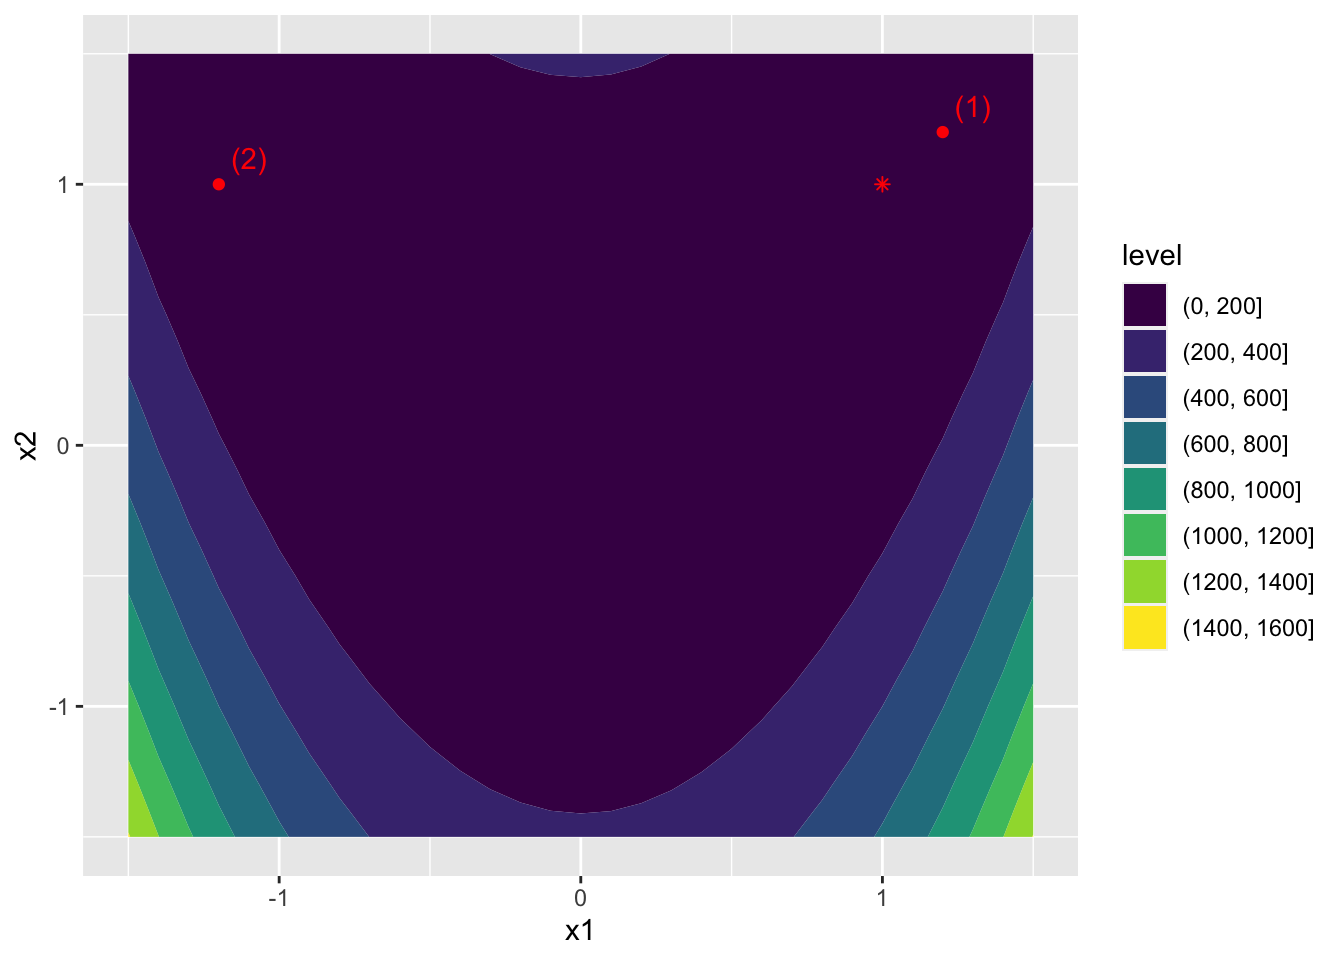 Output of the Rosenbrock function and minimizer in red.